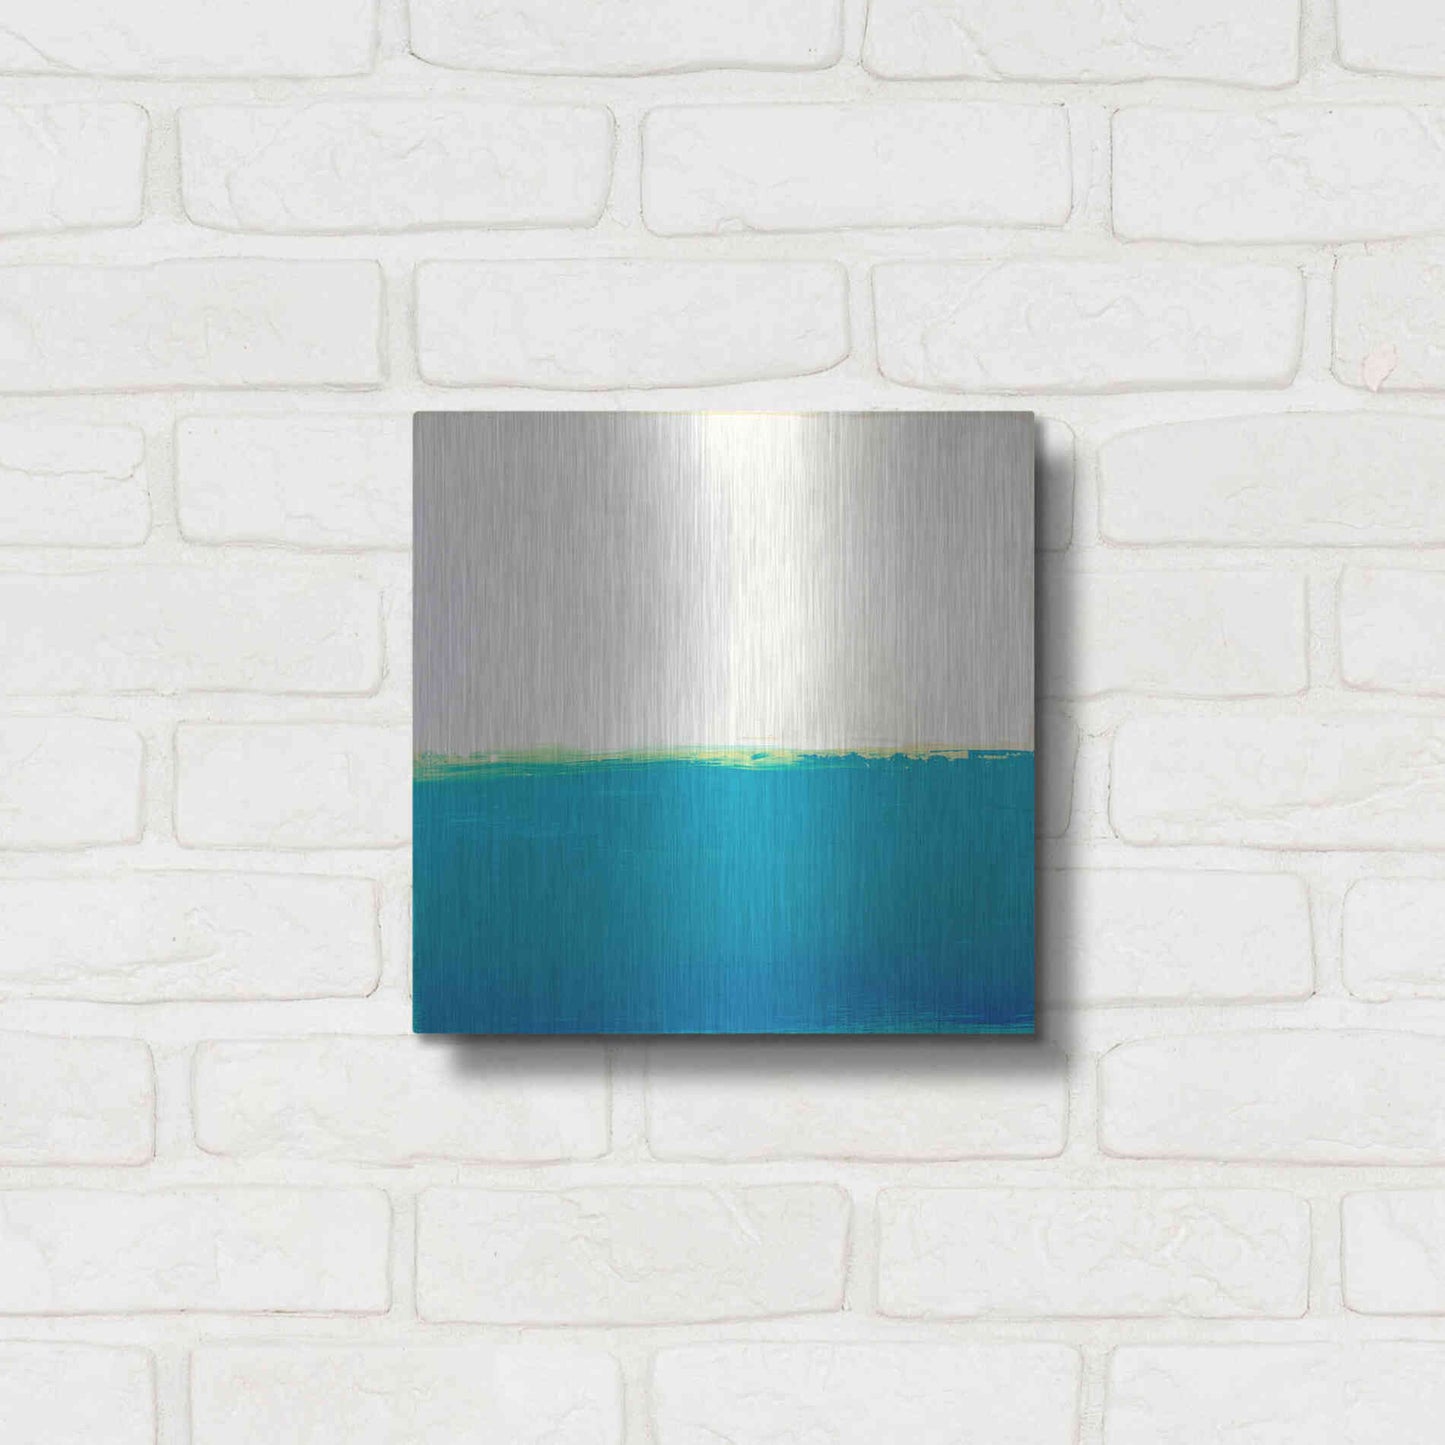 Luxe Metal Art 'Turquoise Sea' by Don Bishop Metal Wall Art,12x12